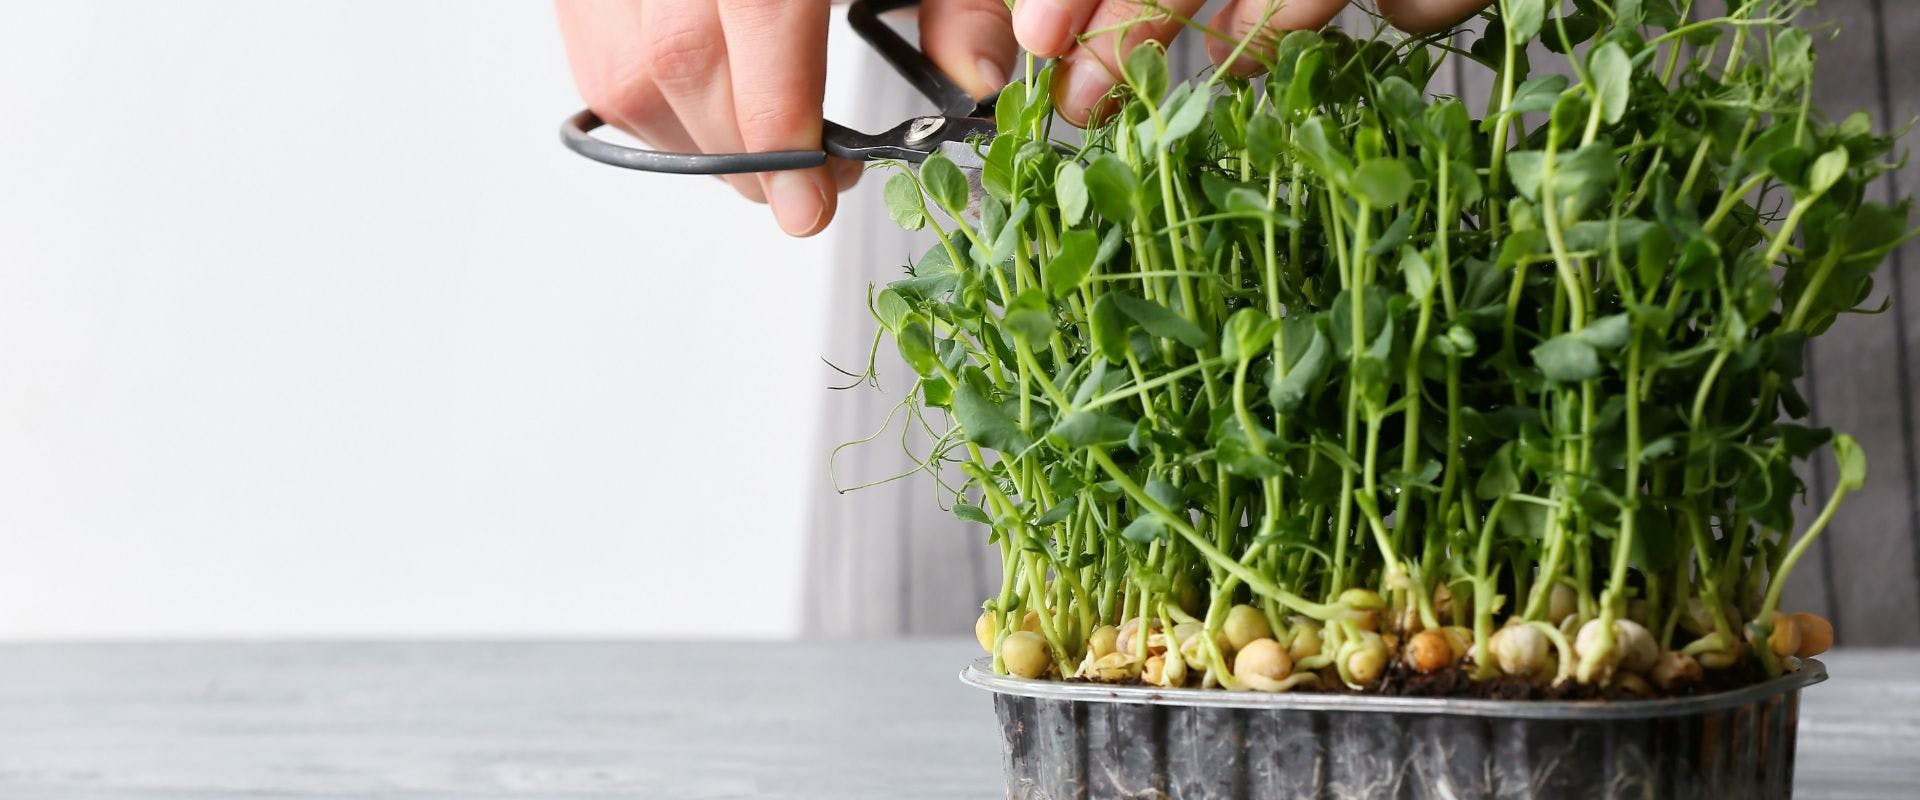 Pea shoots being trimmed from plant